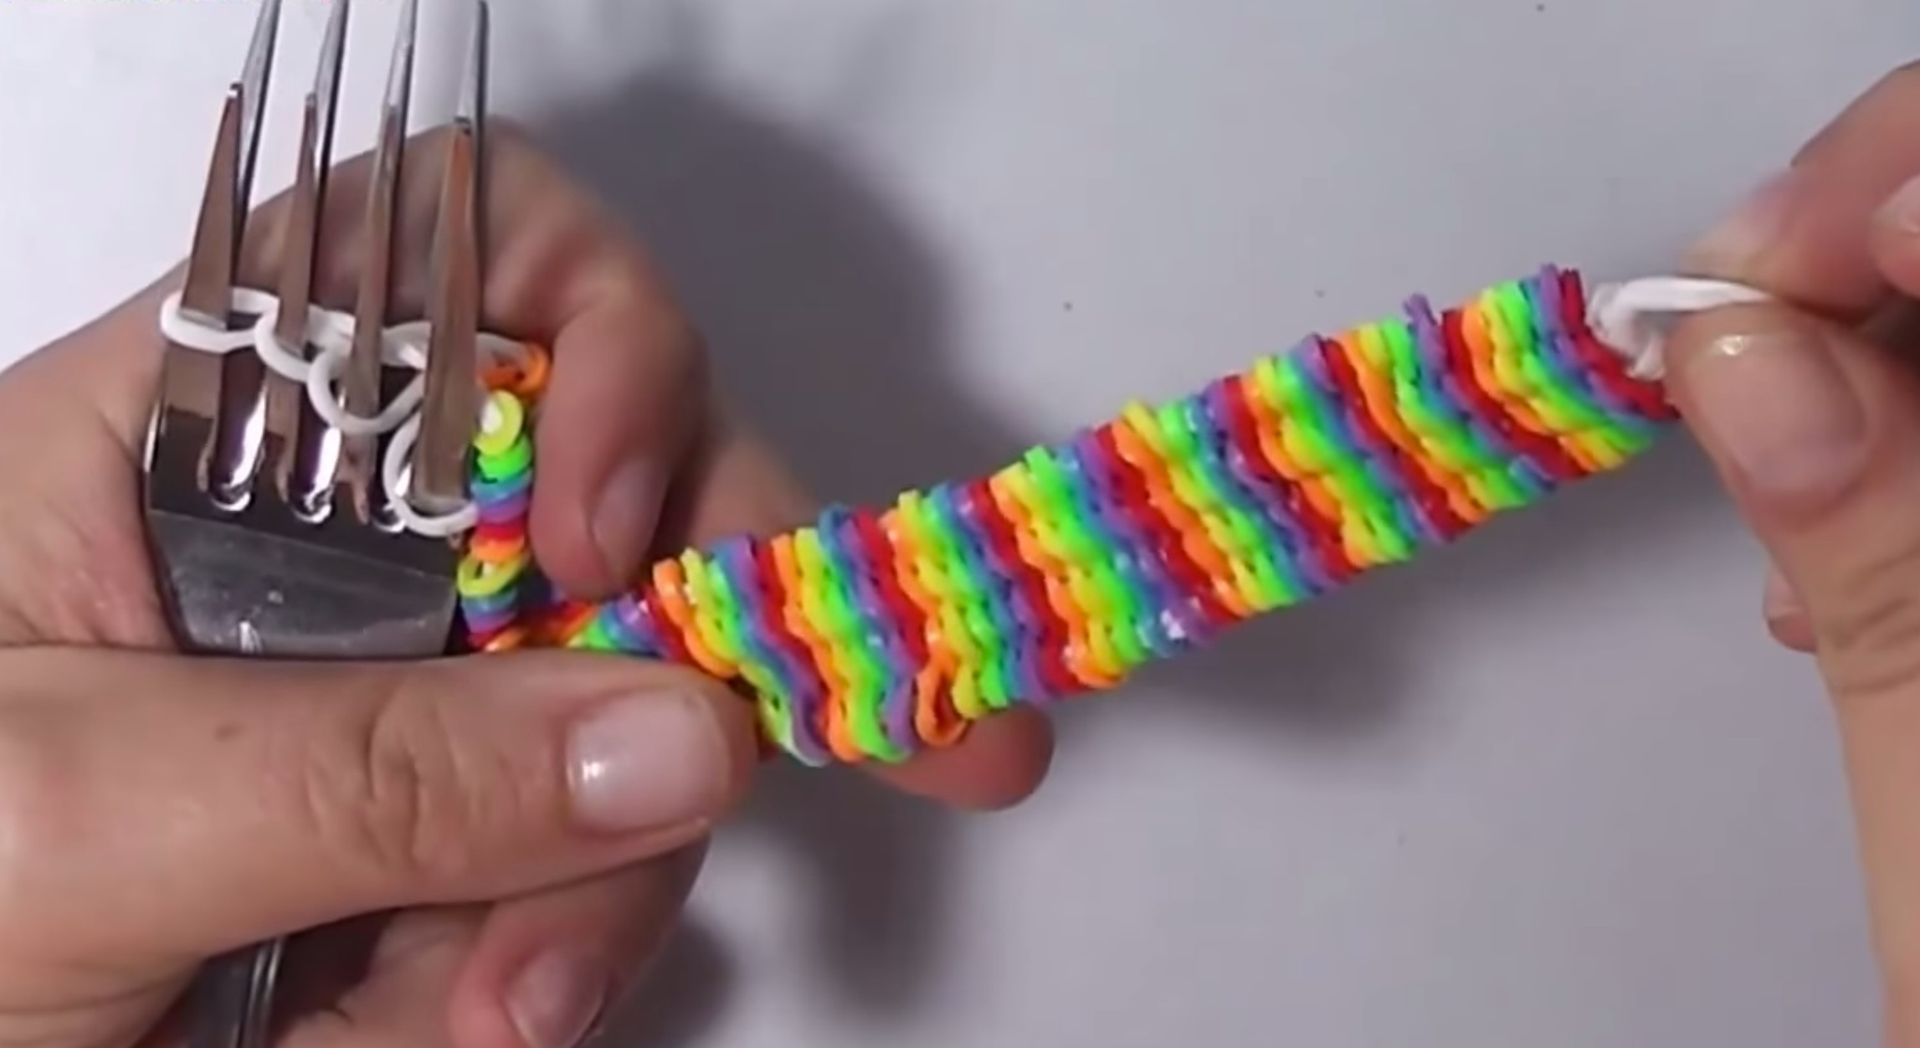 St. Patrick's Day crafts for kids: Rainbow Loom bracelet instructions by Olgacrafts